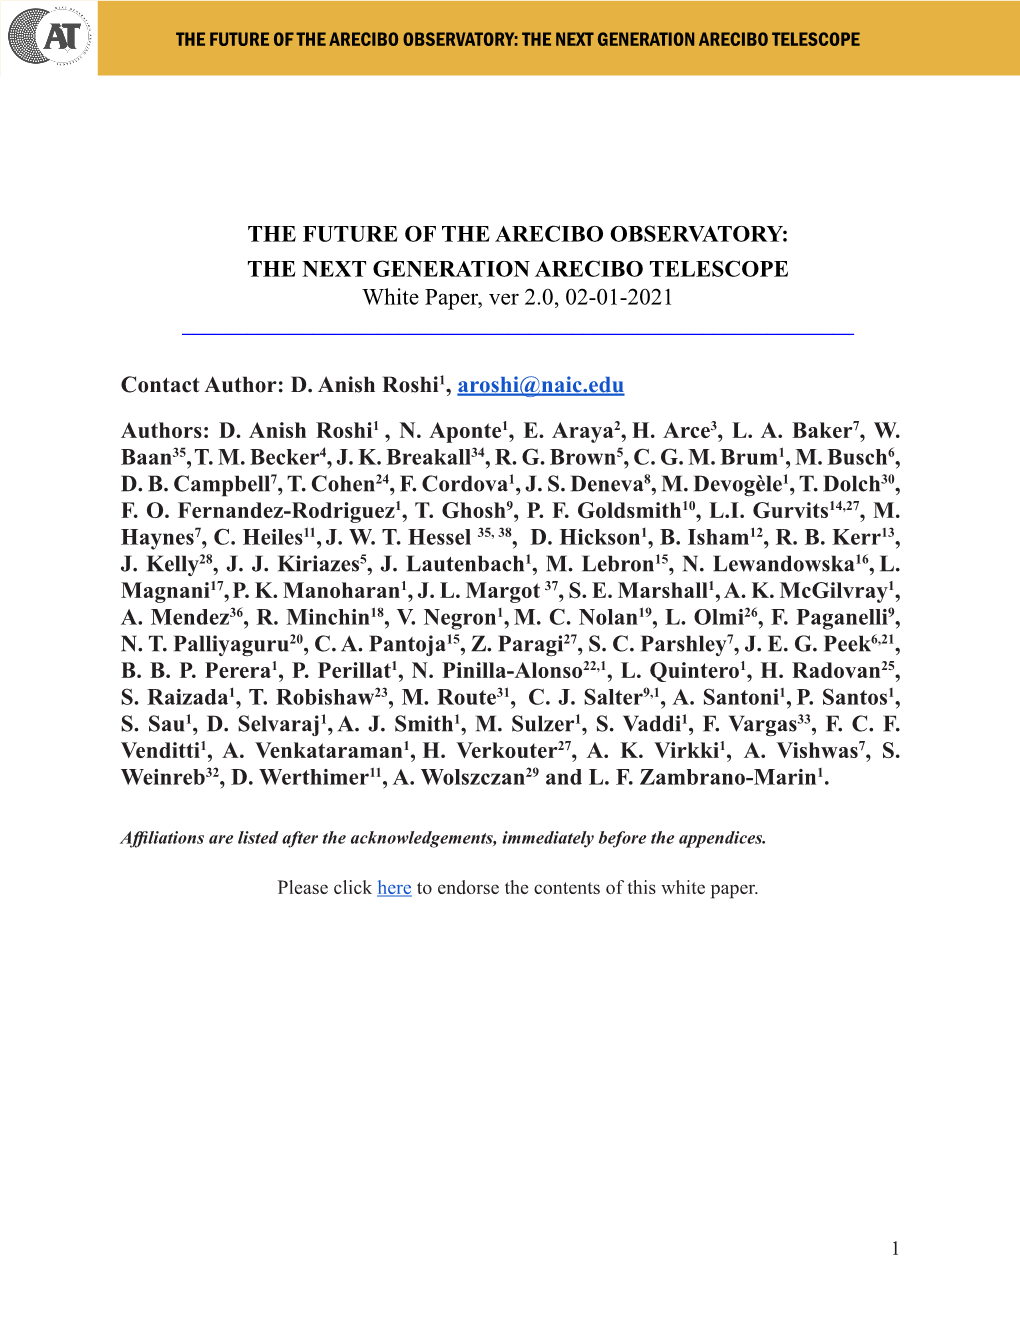 THE FUTURE of the ARECIBO OBSERVATORY: the NEXT GENERATION ARECIBO TELESCOPE White Paper, Ver 2.0, 02-01-2021 Contact Author: D